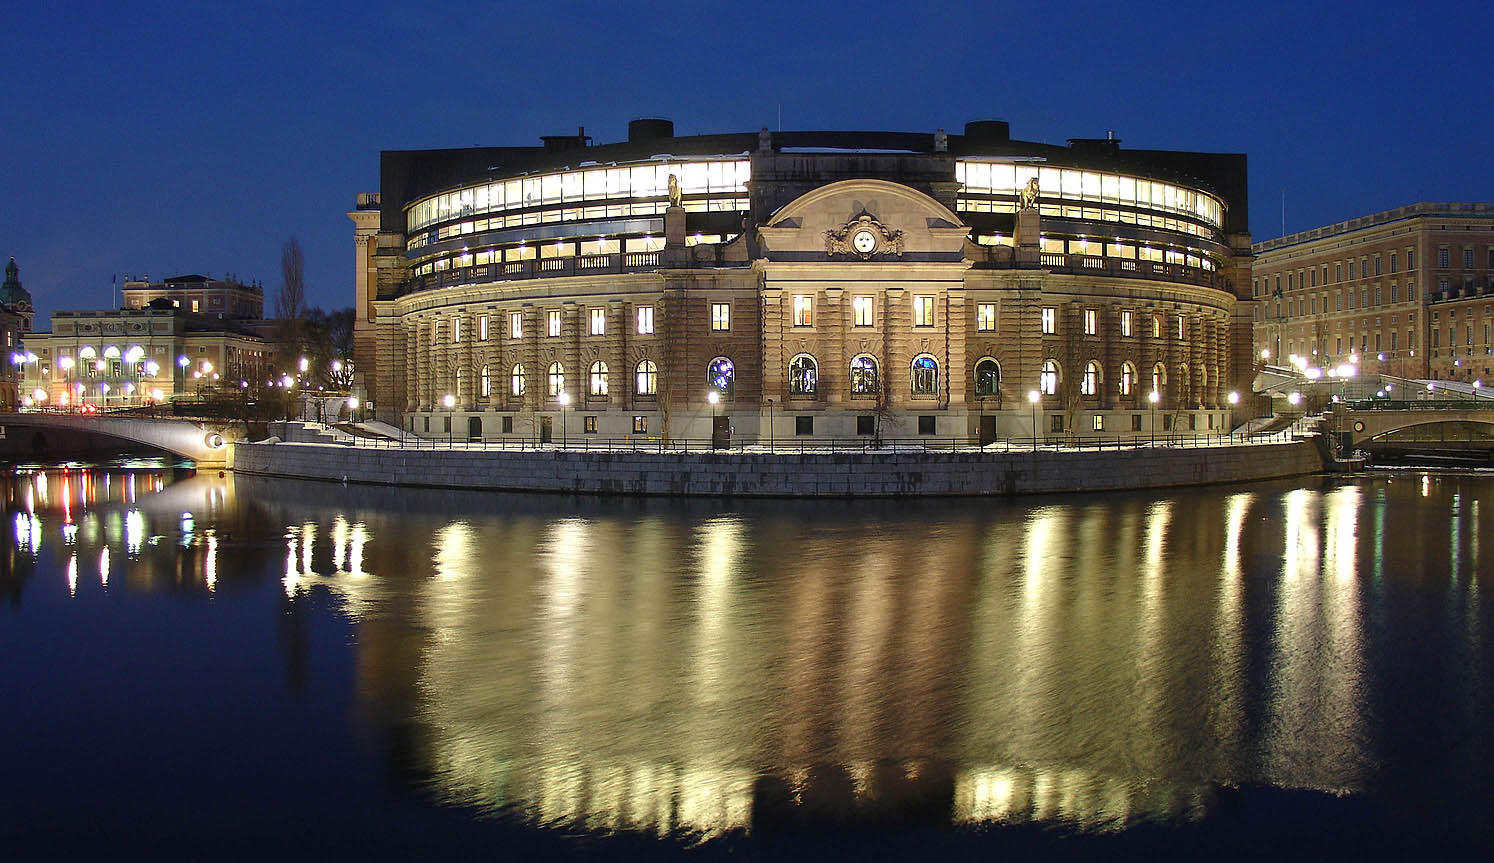 The Swedish Government at the country's Parliament – the Riksdag – has yet to announce whether or not it will back Stockholm Åre 2026 with the official deadline of April 12 less than a week away ©Wikipedia 